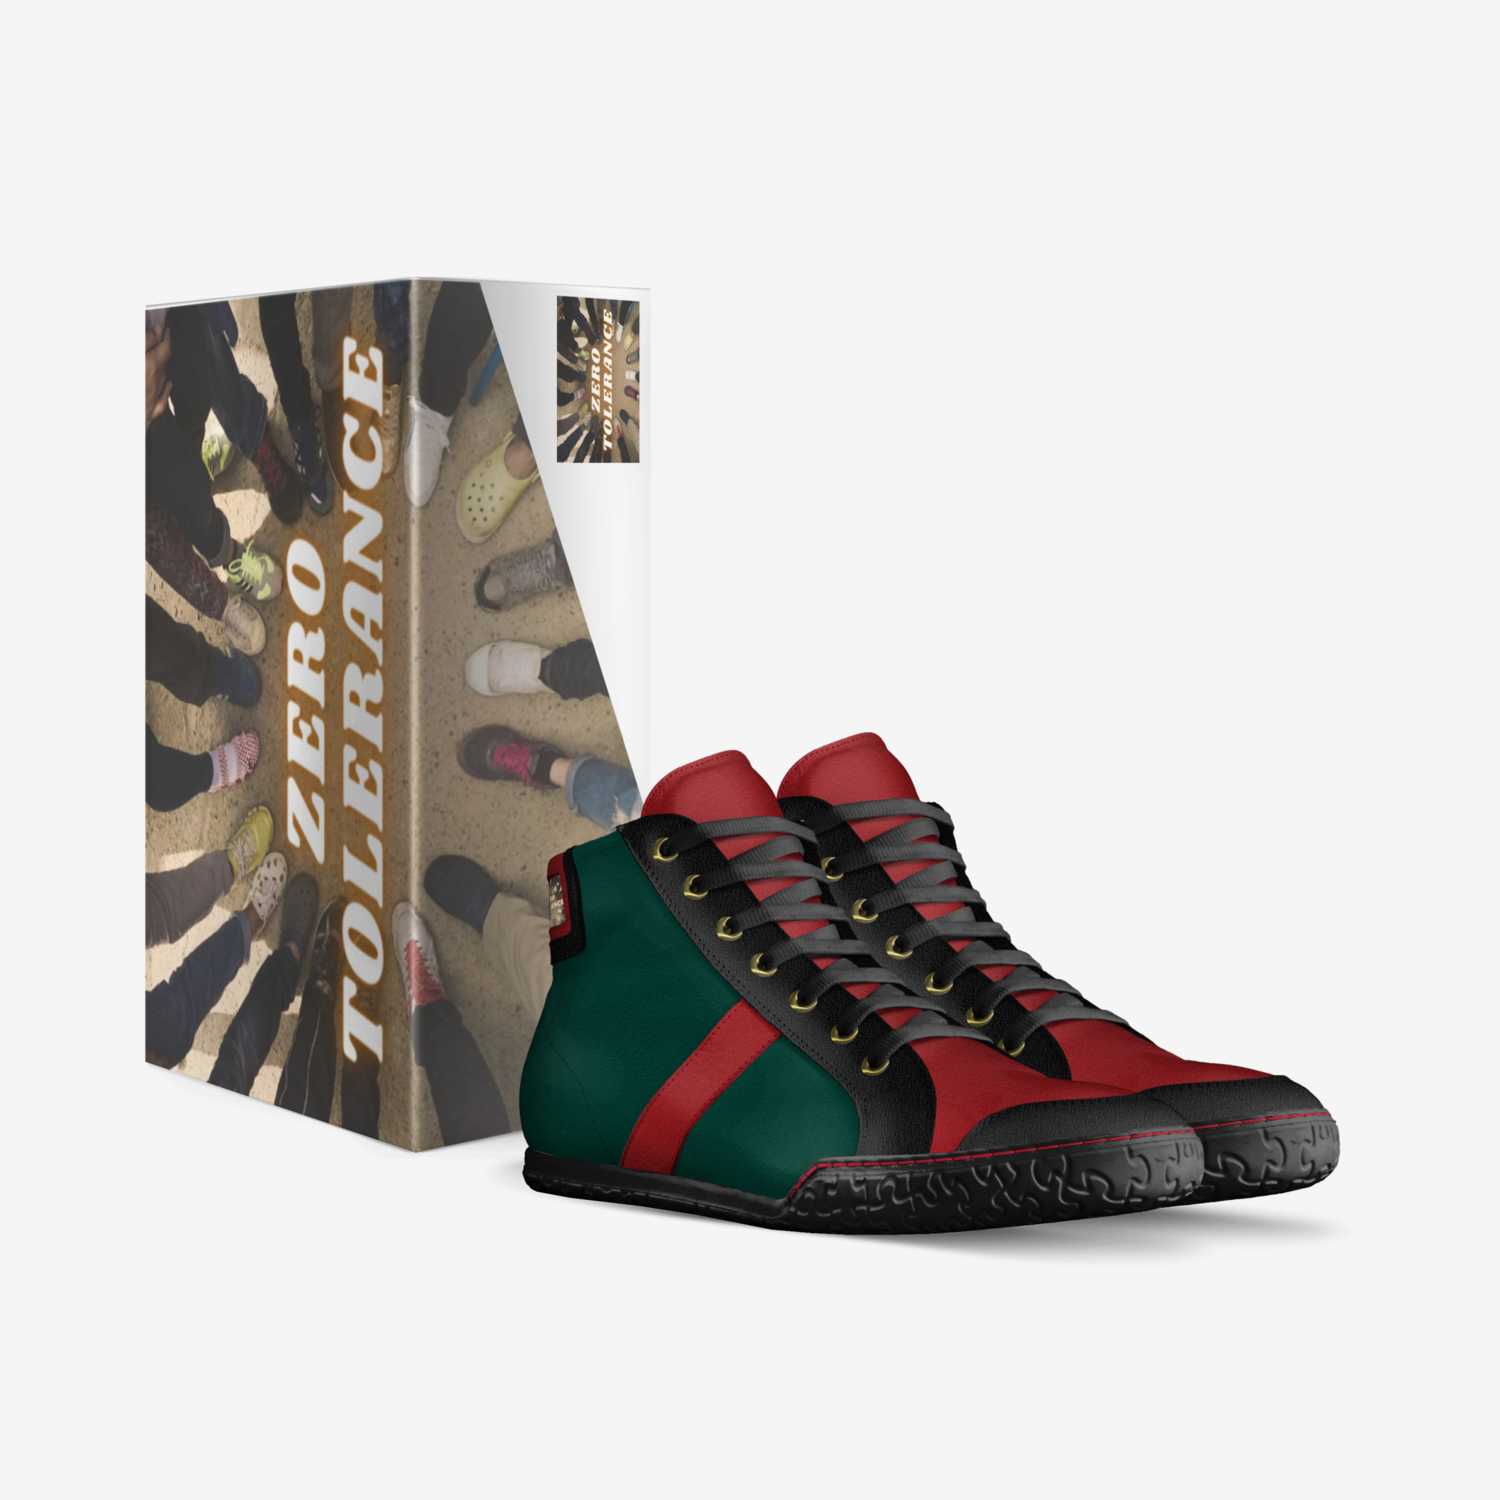 Zero Tolerance custom made in Italy shoes by Dwayne Henderson | Box view